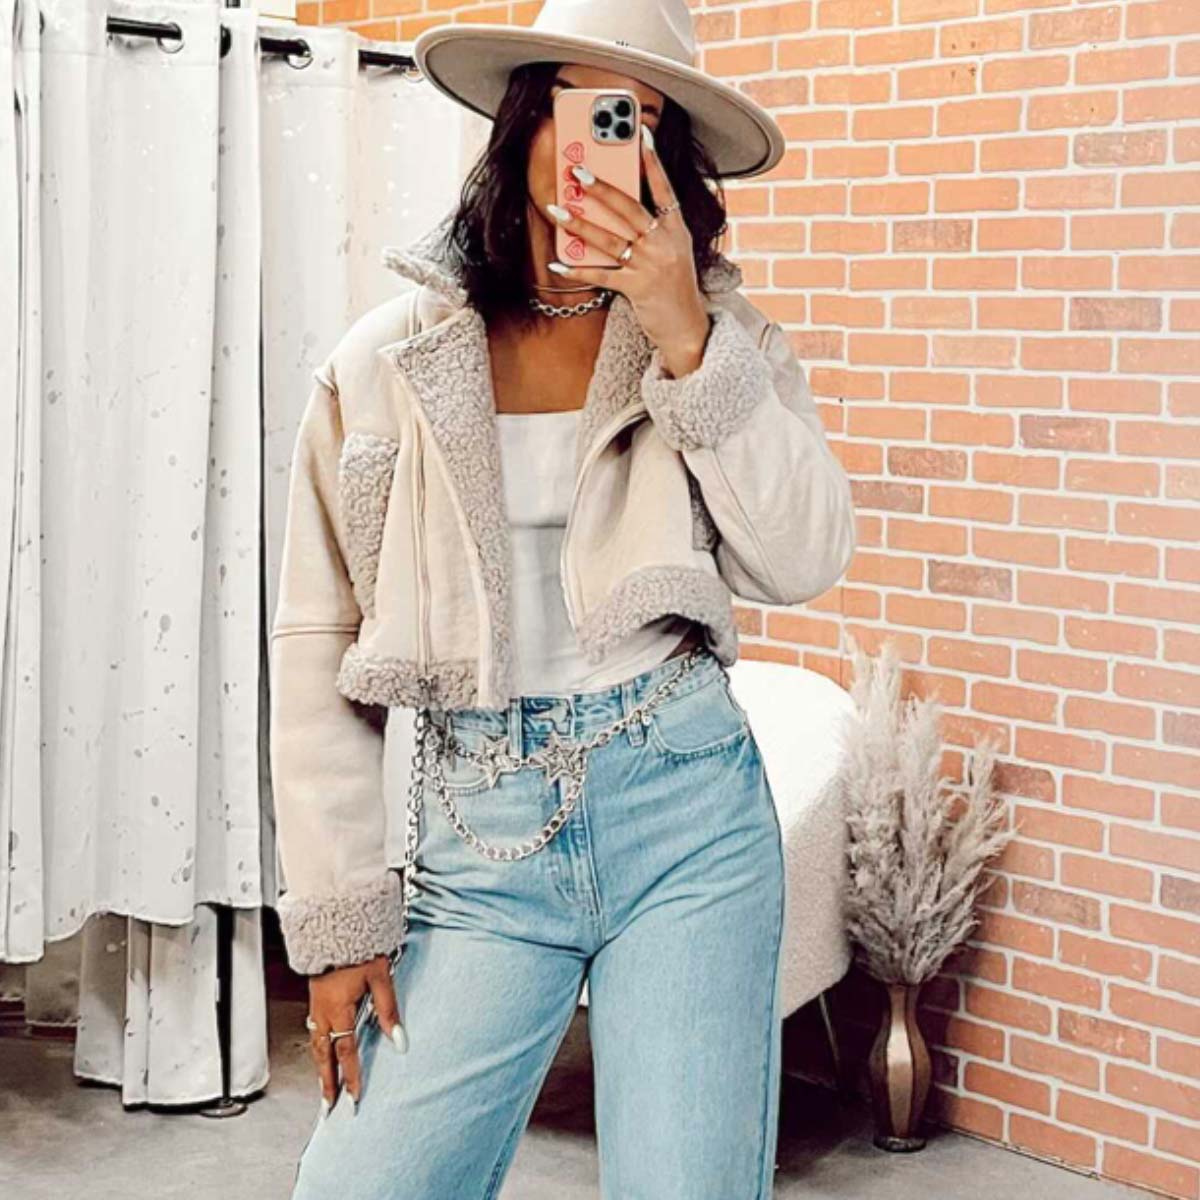 Sherpa jacket with cute hat for mom jeans styles for inspiration